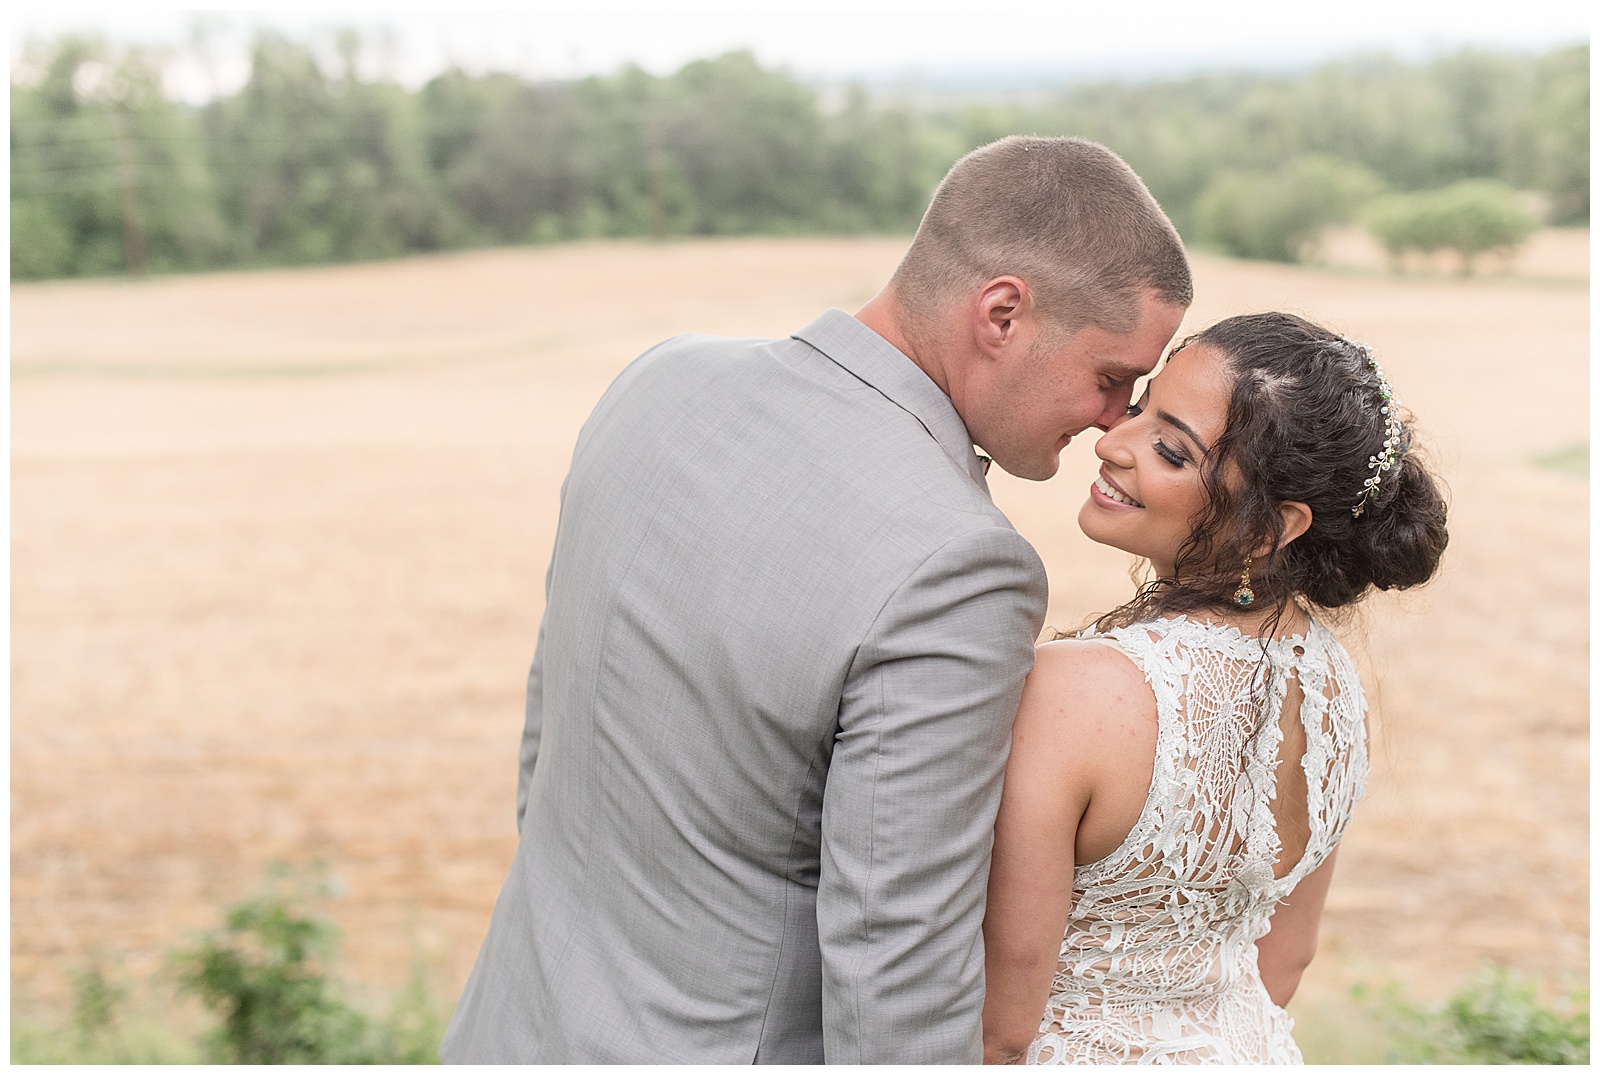 backs of groom and bride toward camera as he leans in to kiss her on her right cheek as she looks back as they stand by field